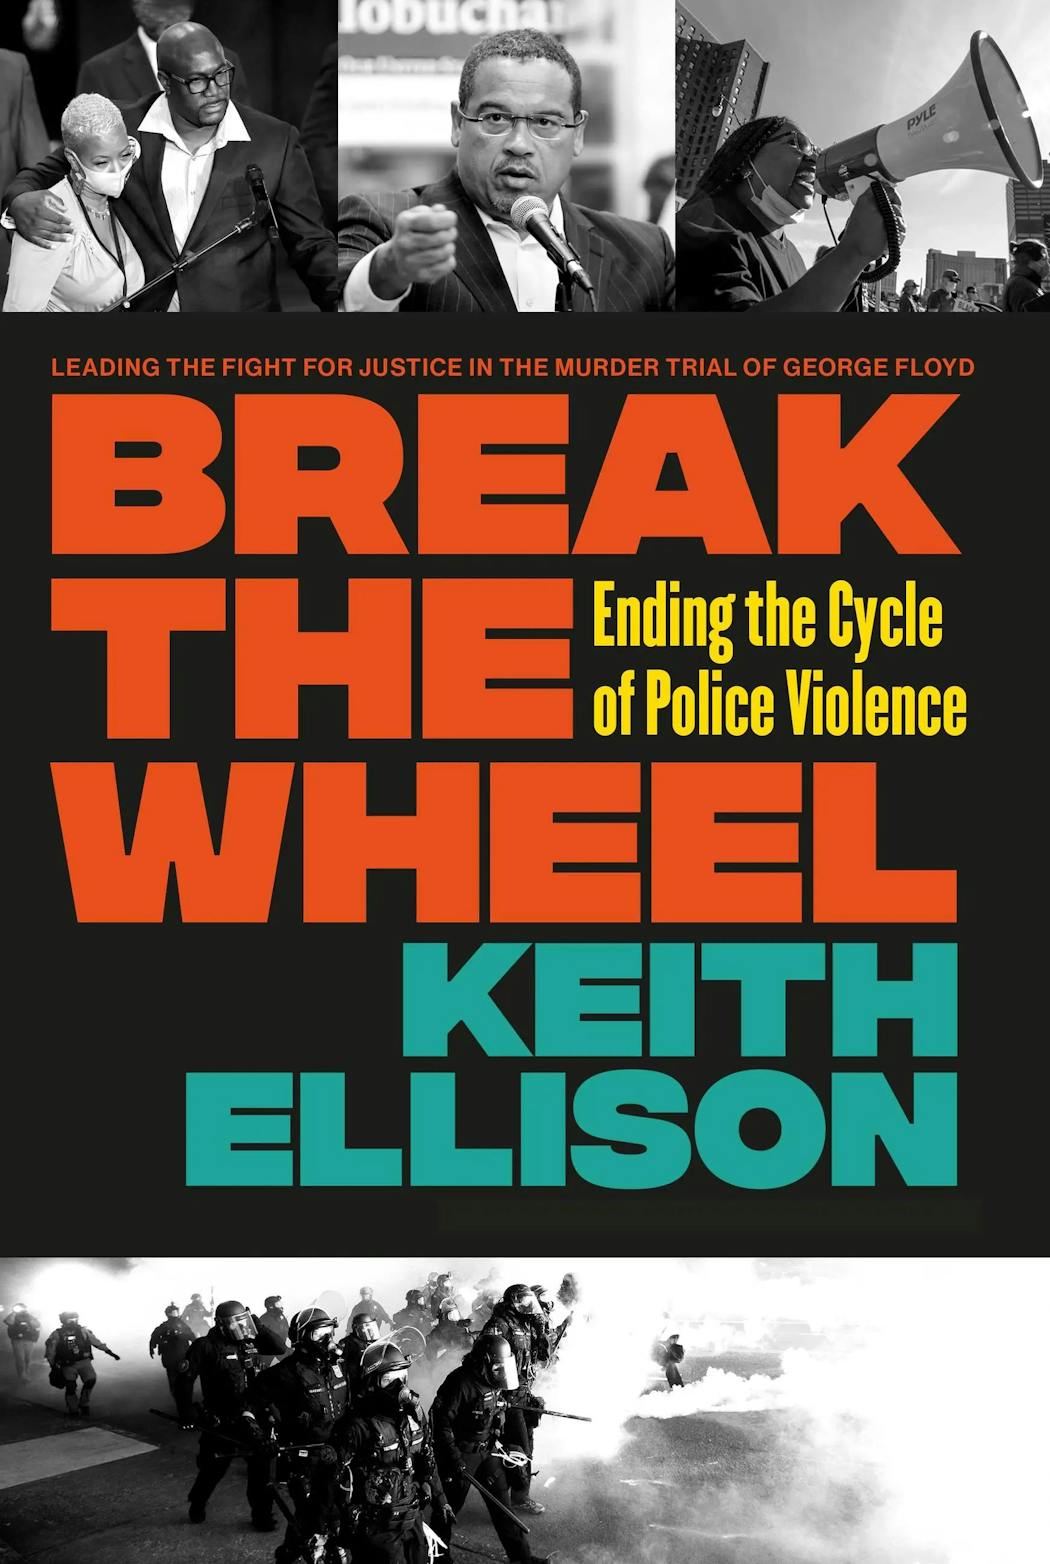 Keith Ellison’s new book will be published May 23.